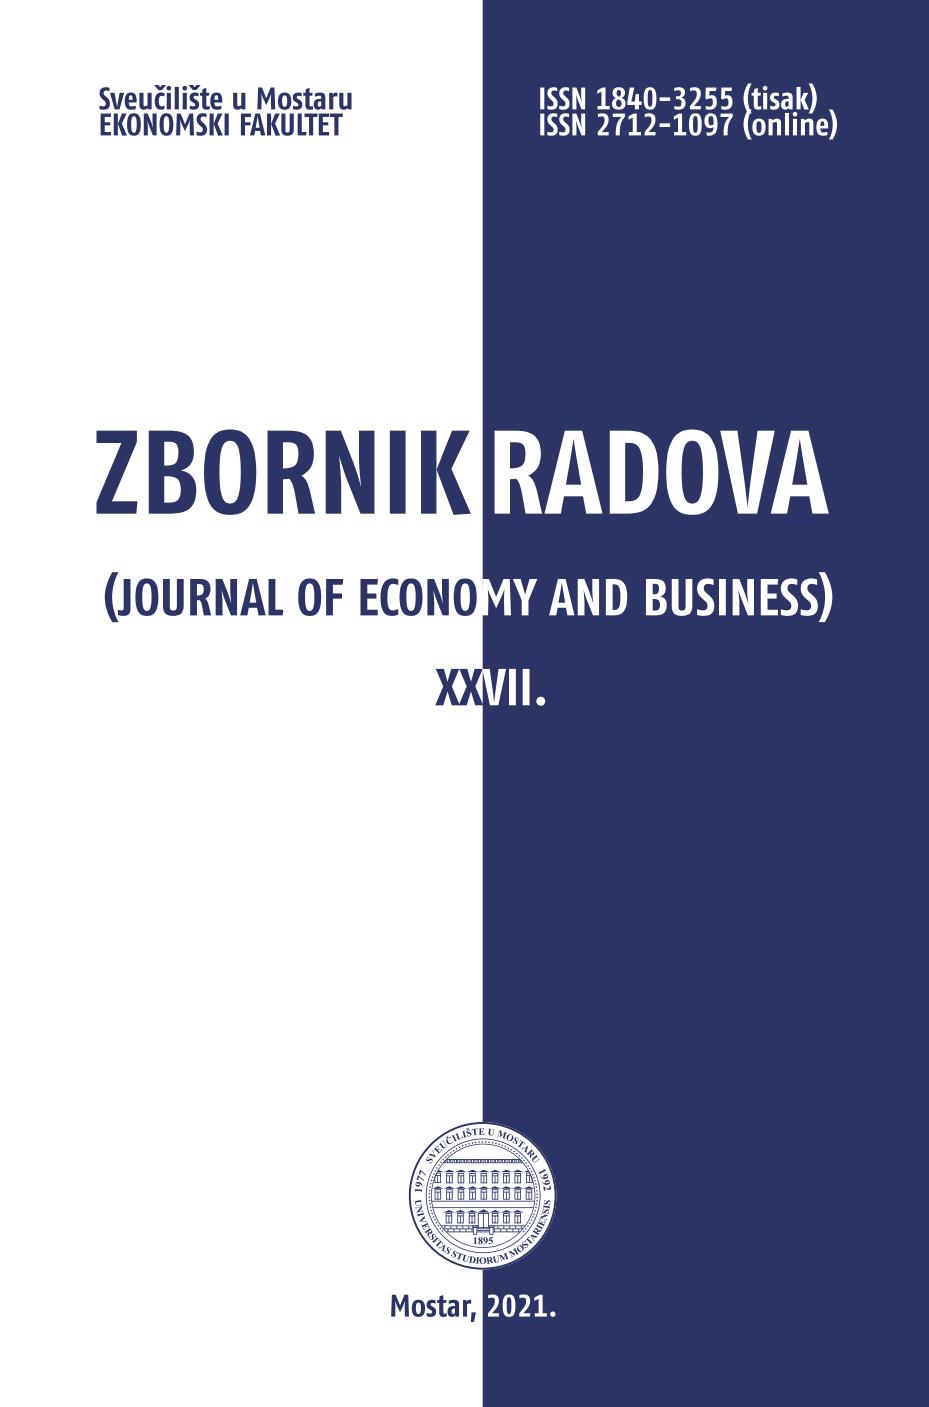 THE IMPACT OF SELECTED FINANCIAL RATIOS AND GROSS DOMESTIC PRODUCT ON THE PERFORMANCE OF ADVERTISING INDUSTRY – A CASE STUDY FROM CROATIA Cover Image